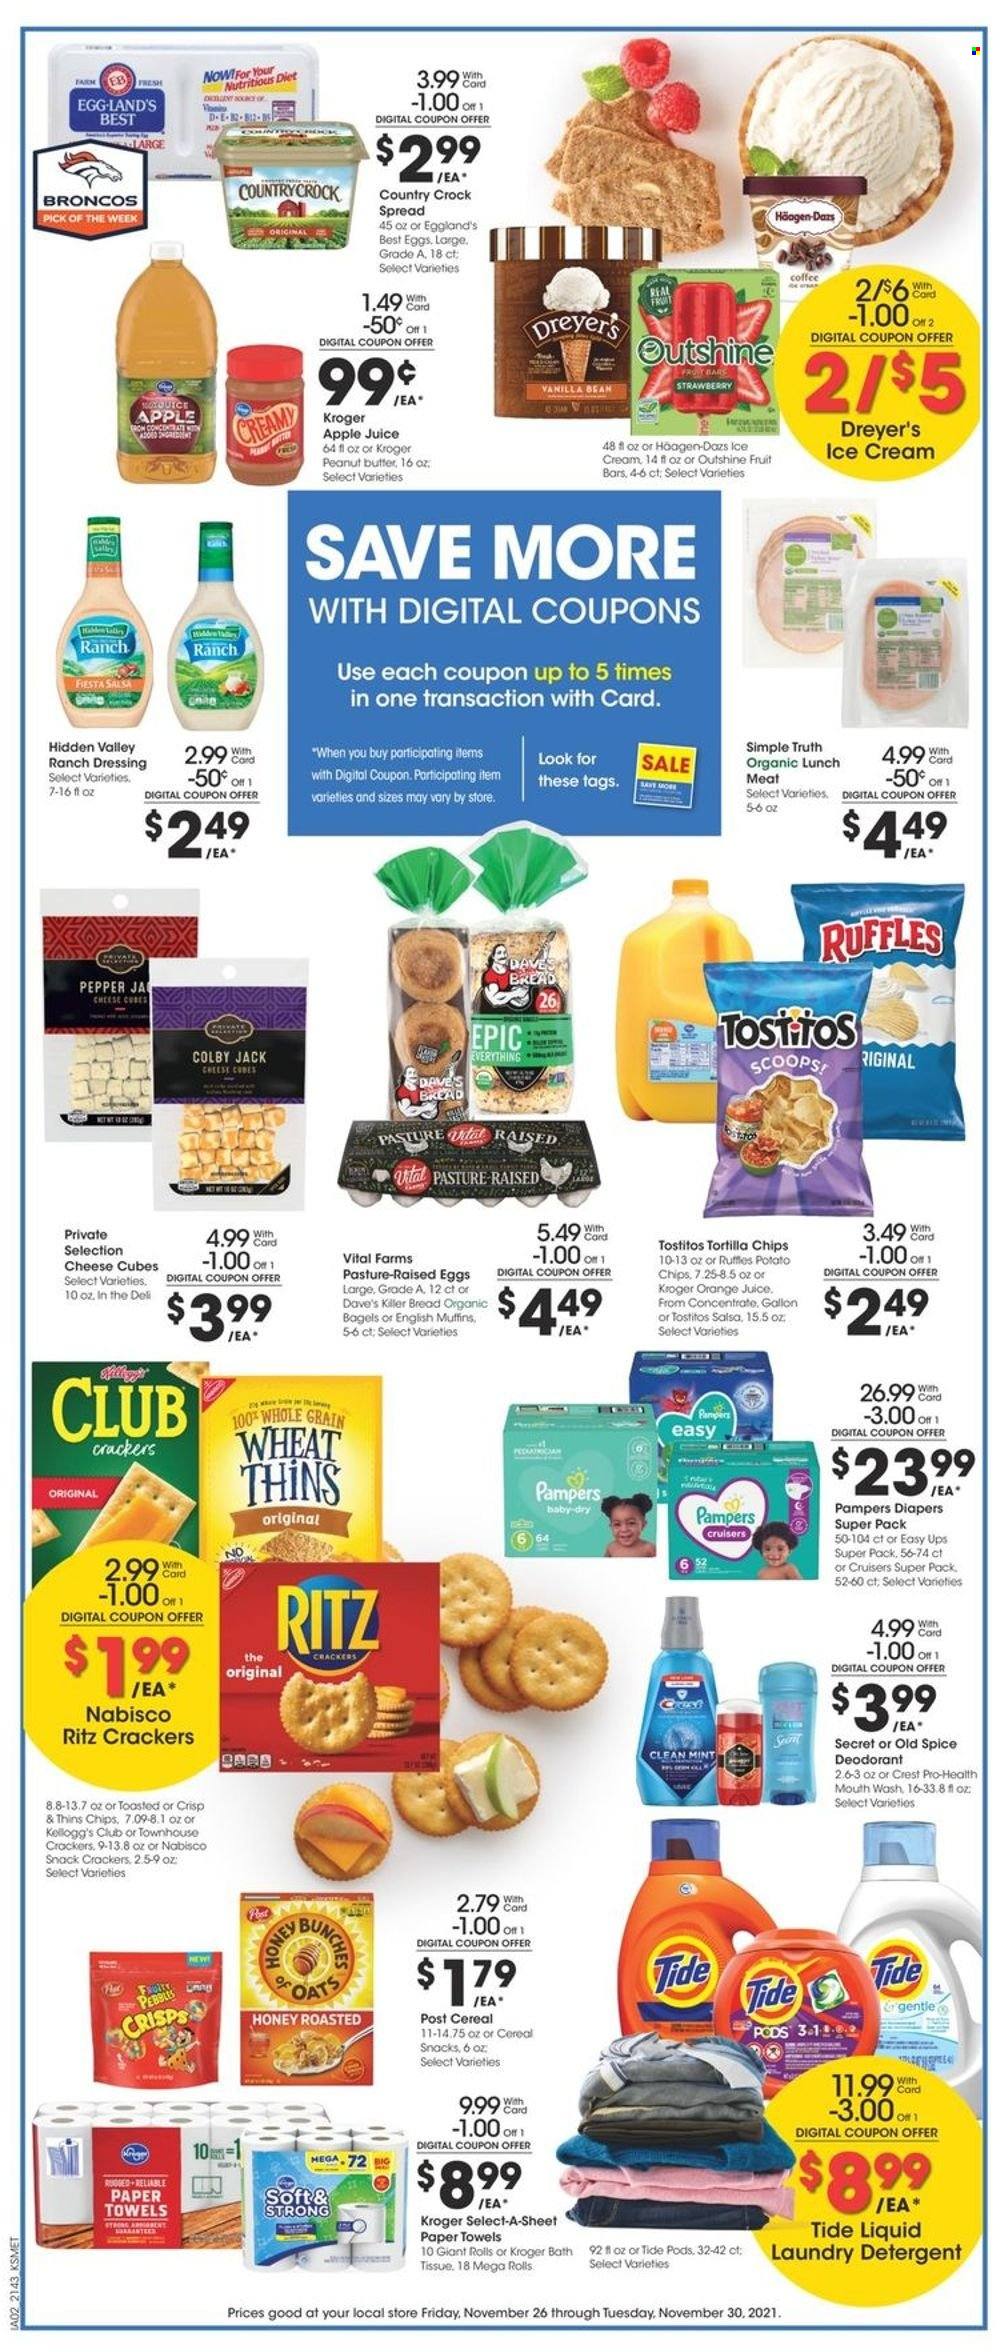 thumbnail - City Market Flyer - 11/26/2021 - 11/30/2021 - Sales products - bagels, bread, lunch meat, Colby cheese, eggs, ranch dressing, ice cream, Häagen-Dazs, snack, crackers, RITZ, tortilla chips, potato chips, chips, Thins, Ruffles, Tostitos, oats, spice, dressing, salsa, honey, peanut butter, apple juice, orange juice, juice, coffee, Pampers, nappies, bath tissue, kitchen towels, paper towels, detergent, Tide, laundry detergent, Old Spice, Crest, anti-perspirant, deodorant. Page 4.